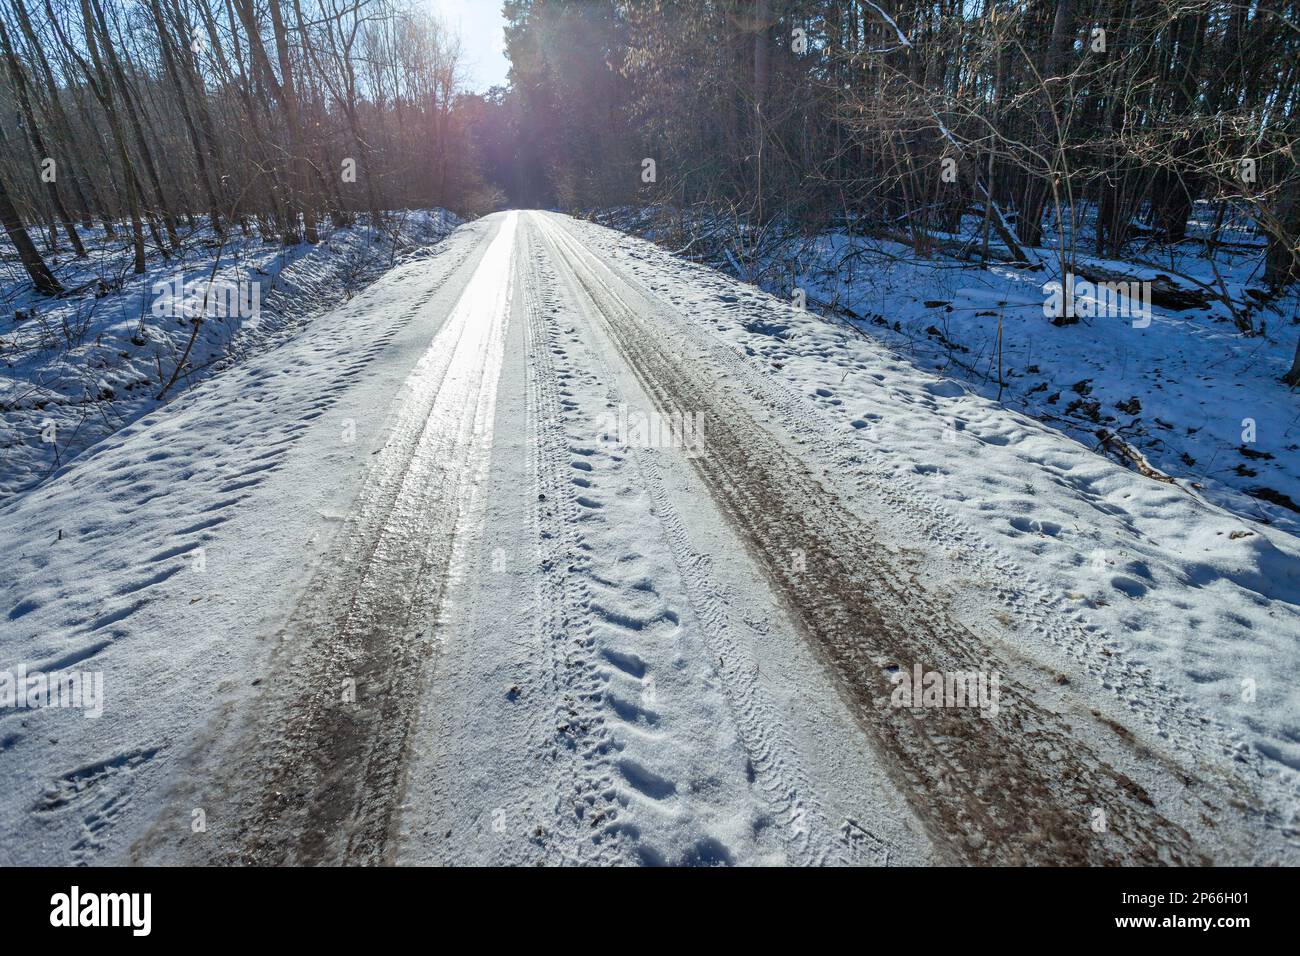 Snow-covered slippery road in the forest, sunny cold winter day Stock Photo